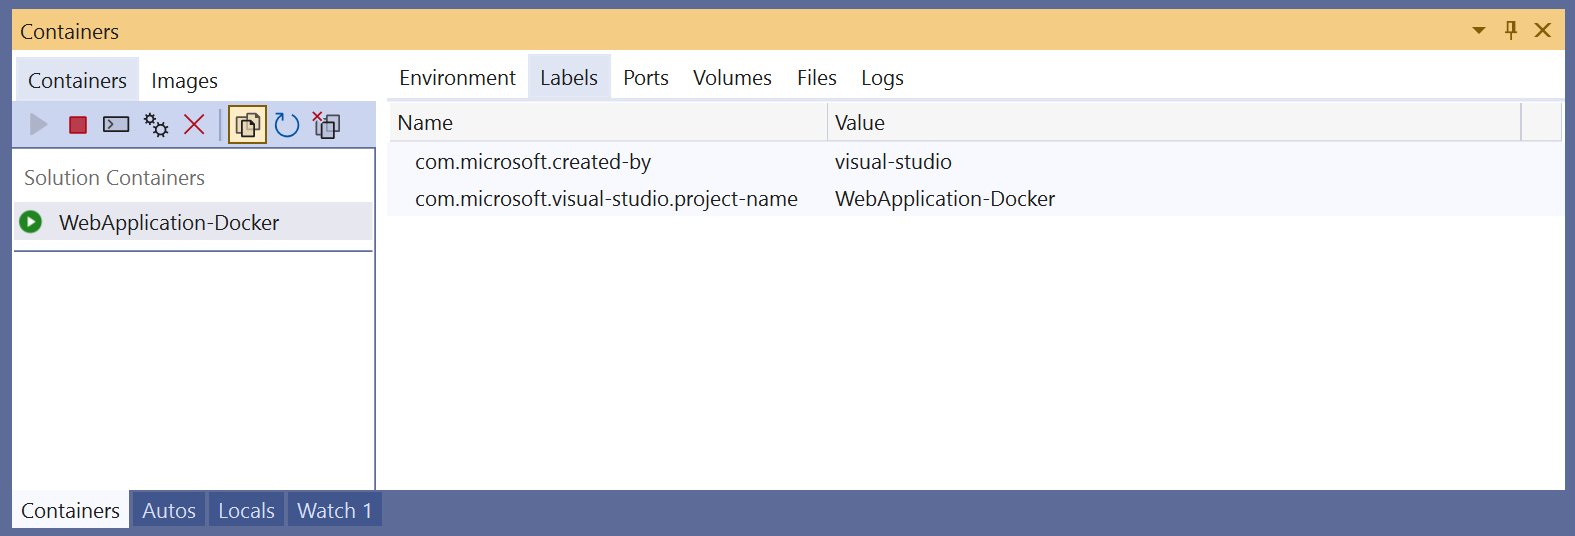 Screenshot of the Containers window in Visual Studio showing the Labels tab.